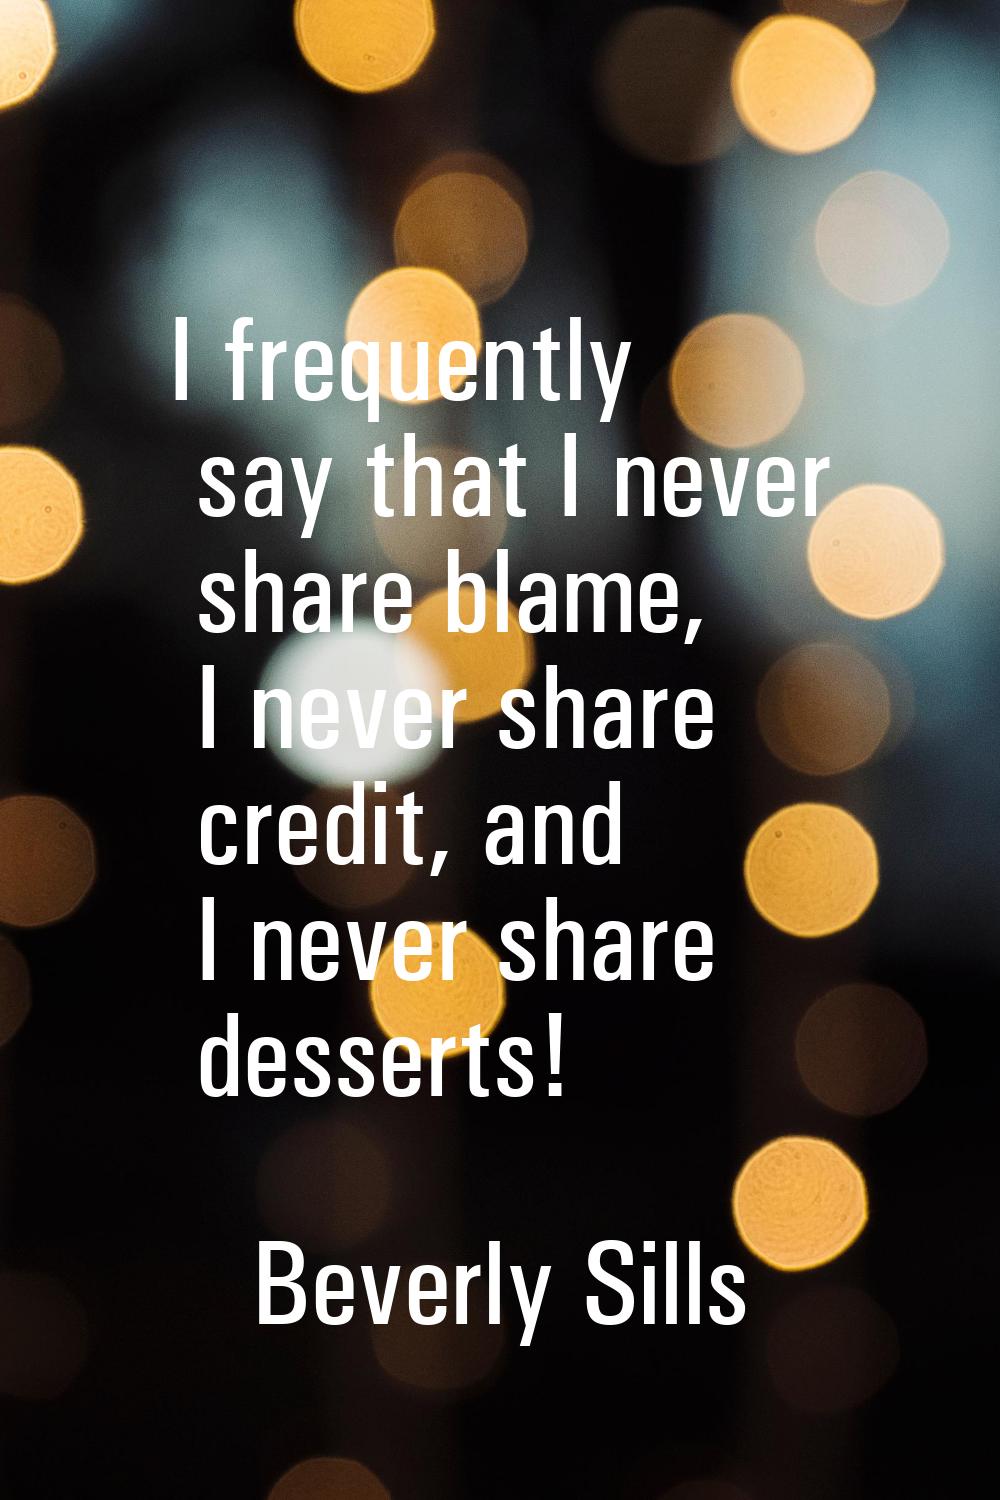 I frequently say that I never share blame, I never share credit, and I never share desserts!